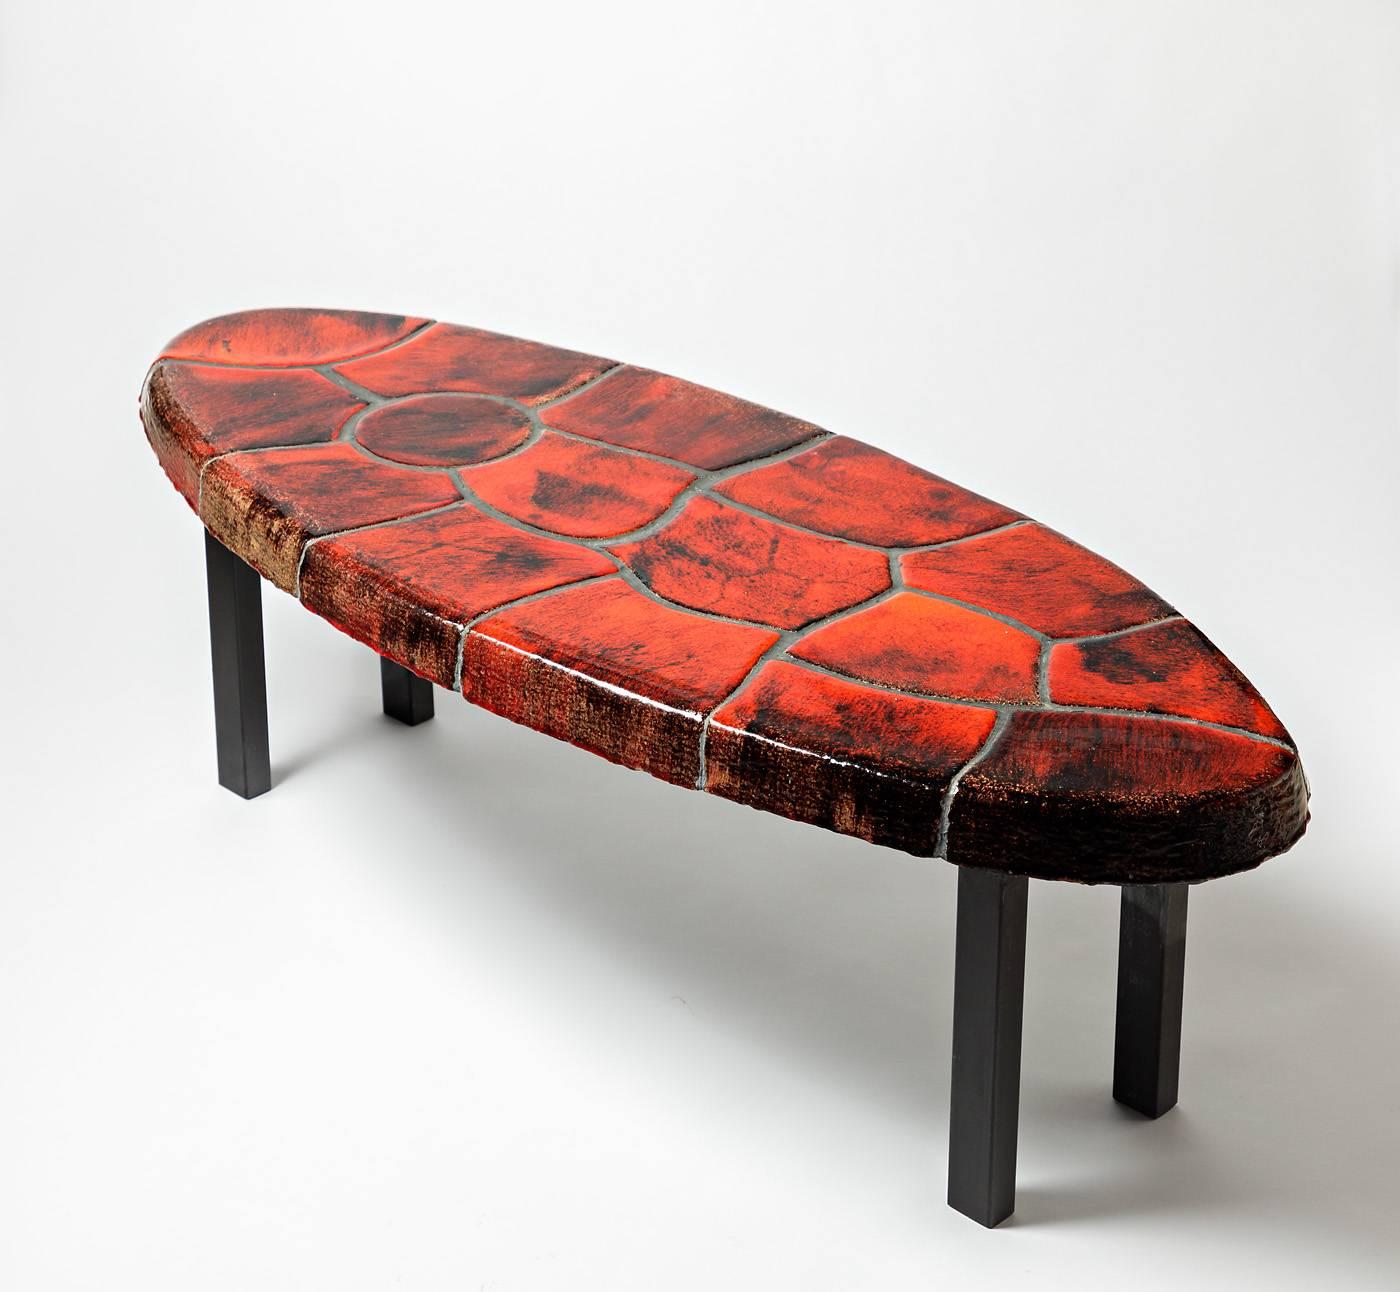 Exceptional low ceramic table

French production, circa 1970

Extraordinary red ceramic glaze and blackened metal legs

Dimensions: 36 x 110 x 43cm.